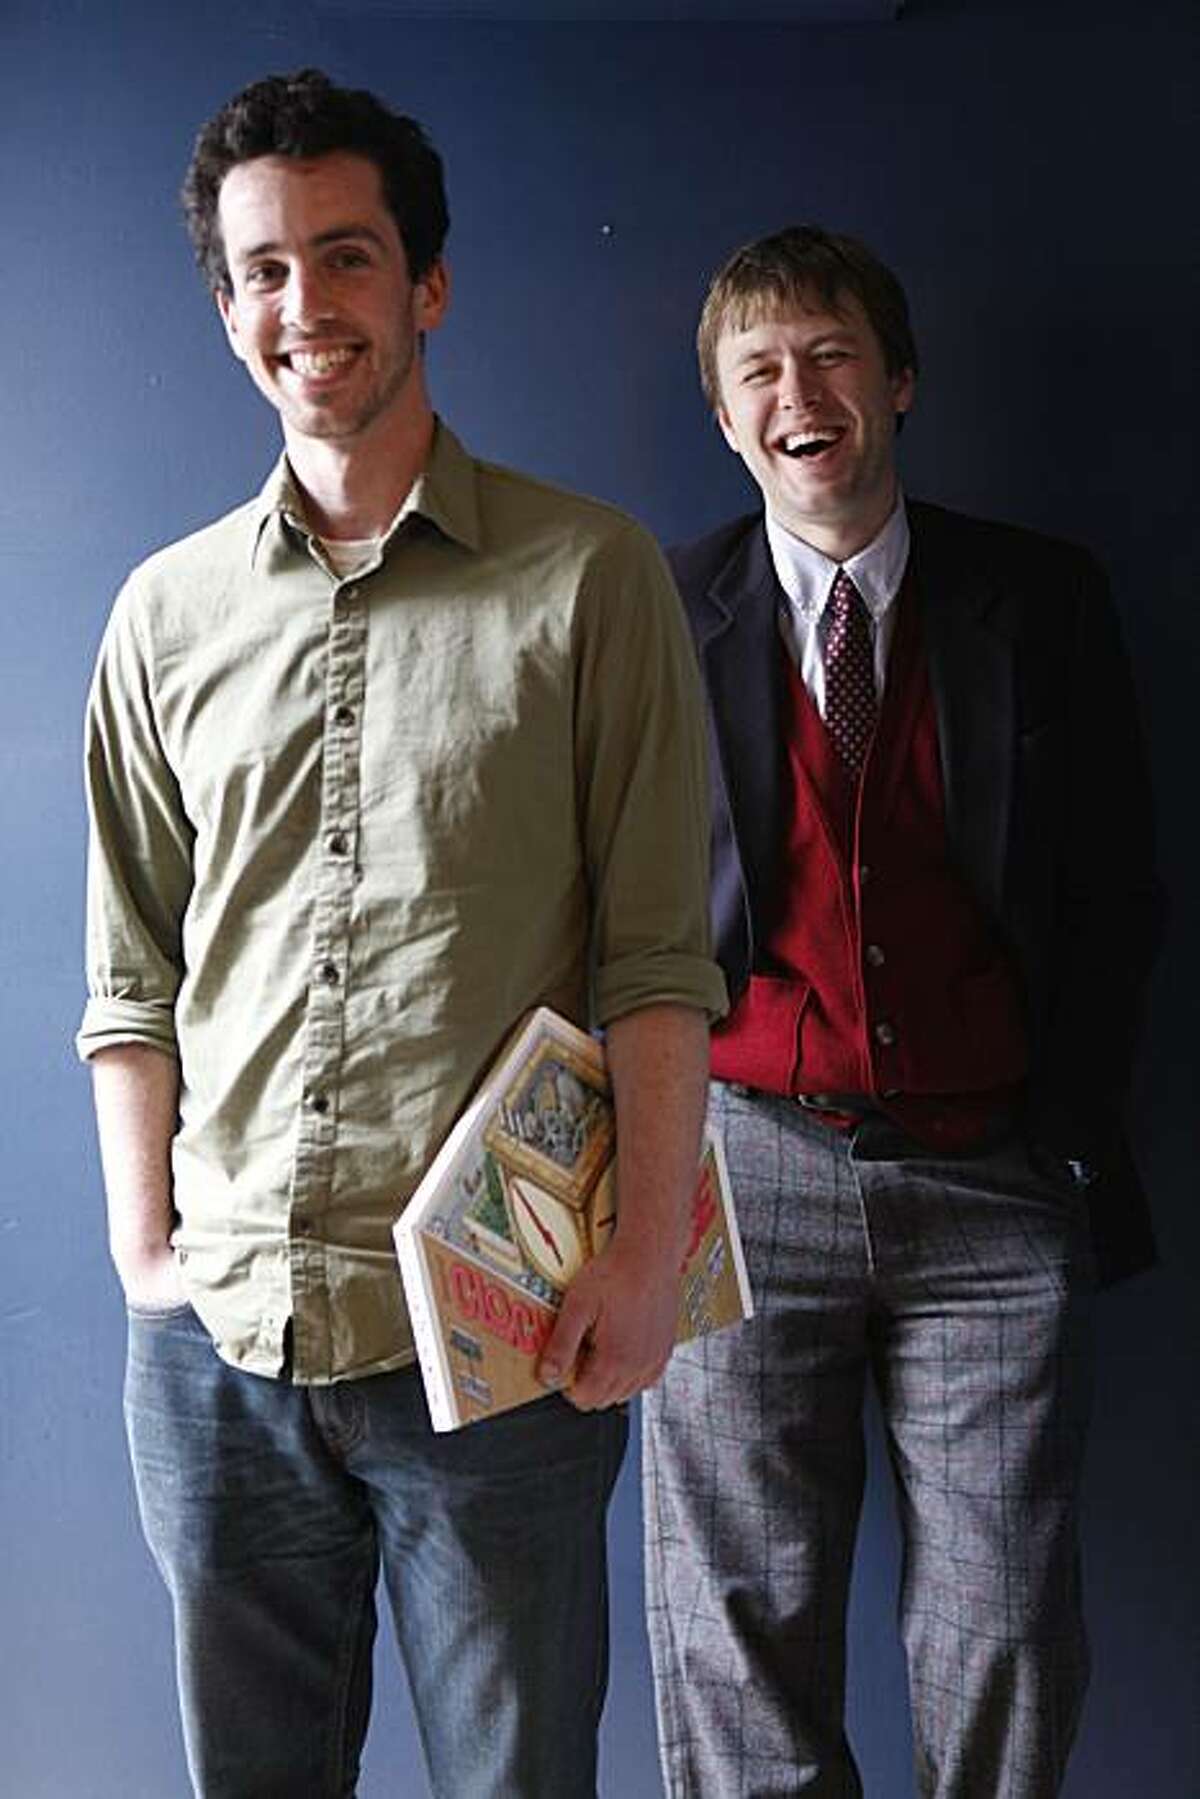 Eli Horowitz and Mac Barnett, authors of a new McSweeney's book called The Clock Without A Face, stand for a portrait at McSweeney's offices on Tuesday April 27, 2010 in San Francisco, Calif.